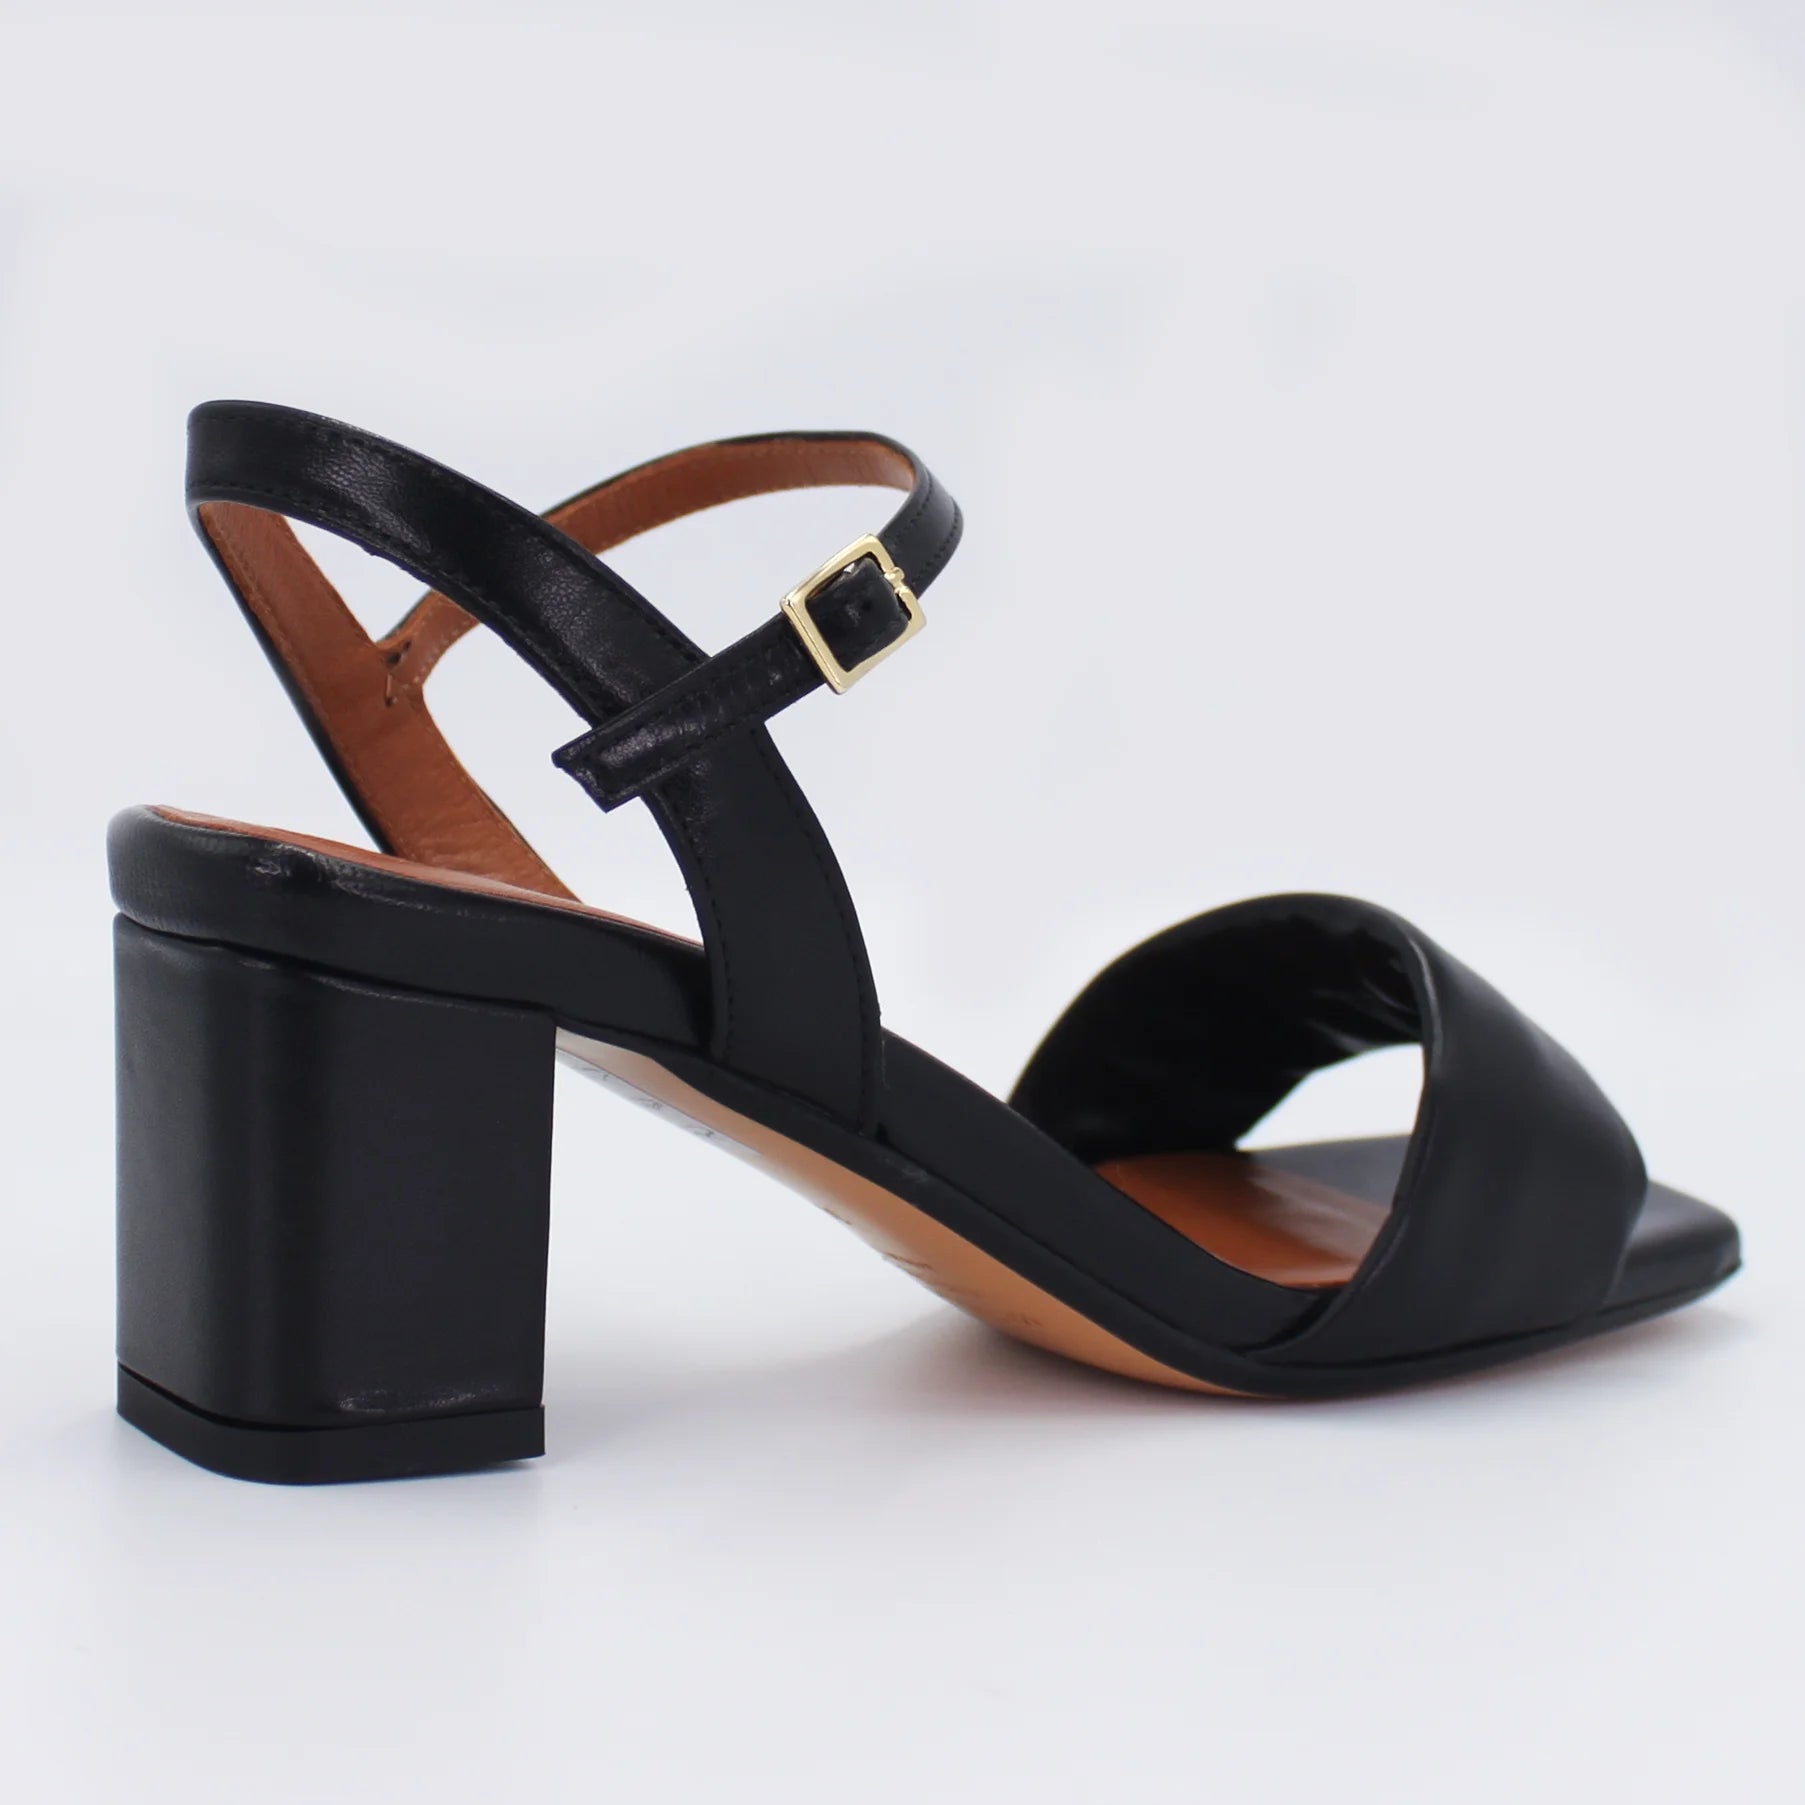 Shop Handmade Italian Leather Block Heel for Women in Black (2529) or browse our range of hand-made Italian heels for women in leather or suede in-store at Aliverti Durban or Cape Town, or shop online. We deliver in South Africa & offer multiple payment plans as well as accept multiple safe & secure payment methods.